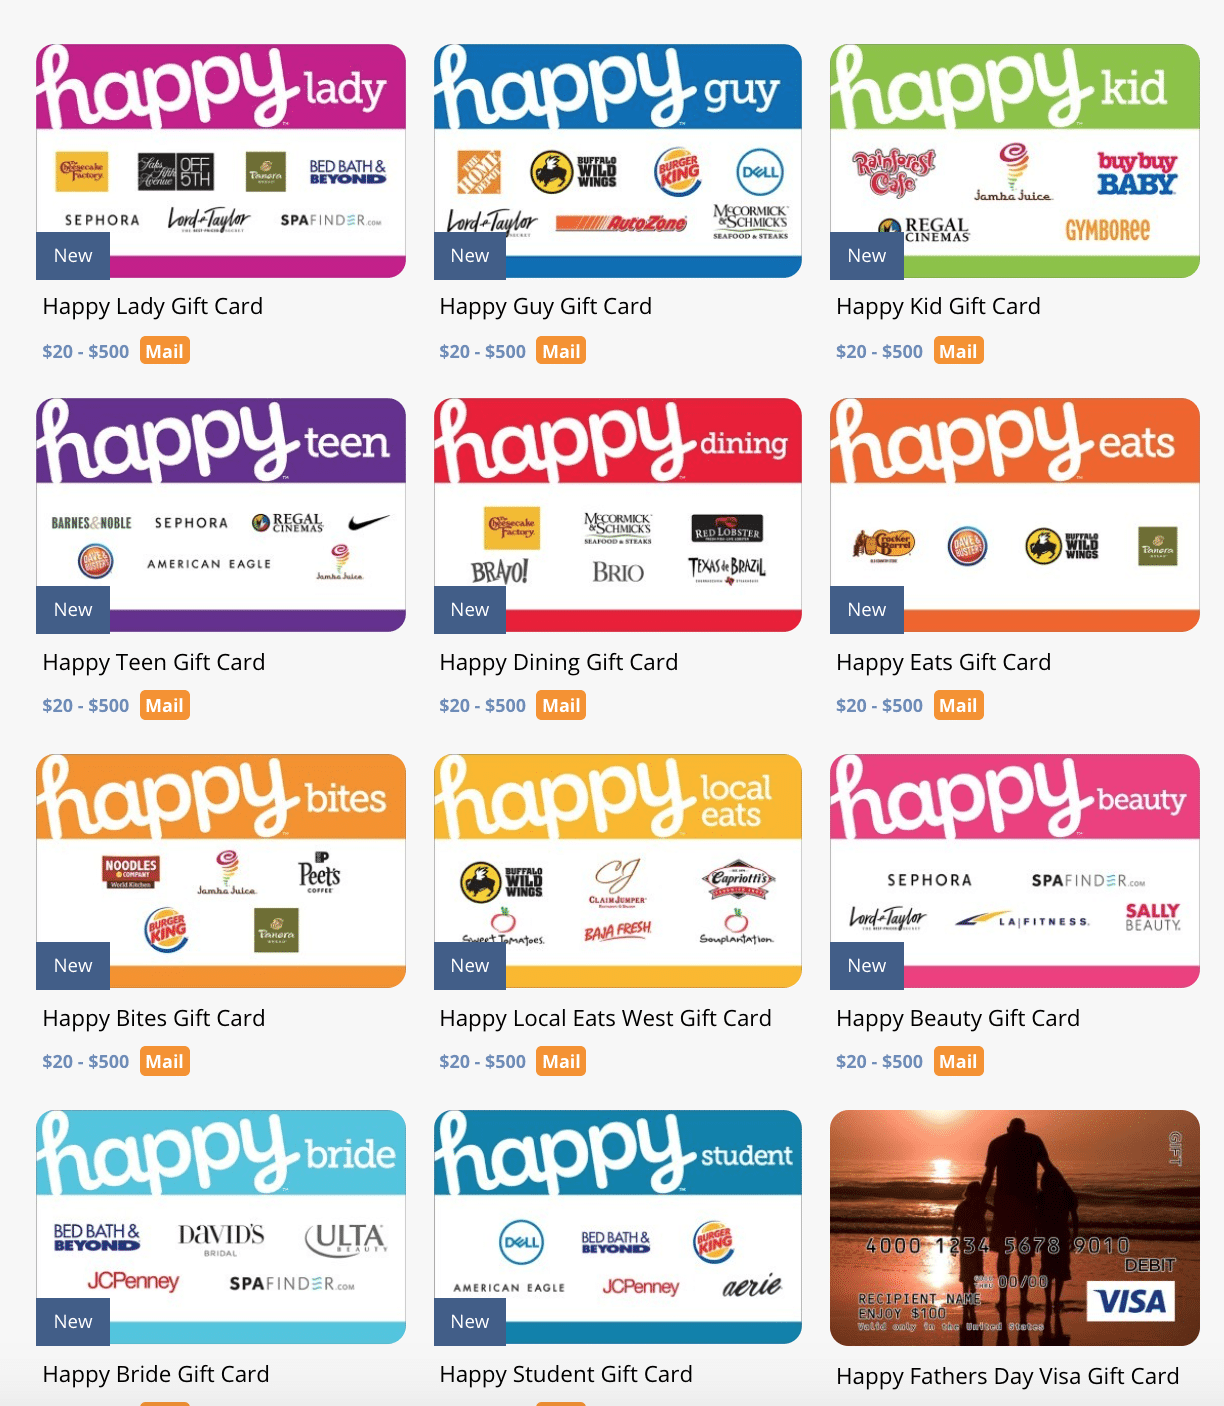 MetaBank Releases New 'Happy' Gift Card Line, Alongside their